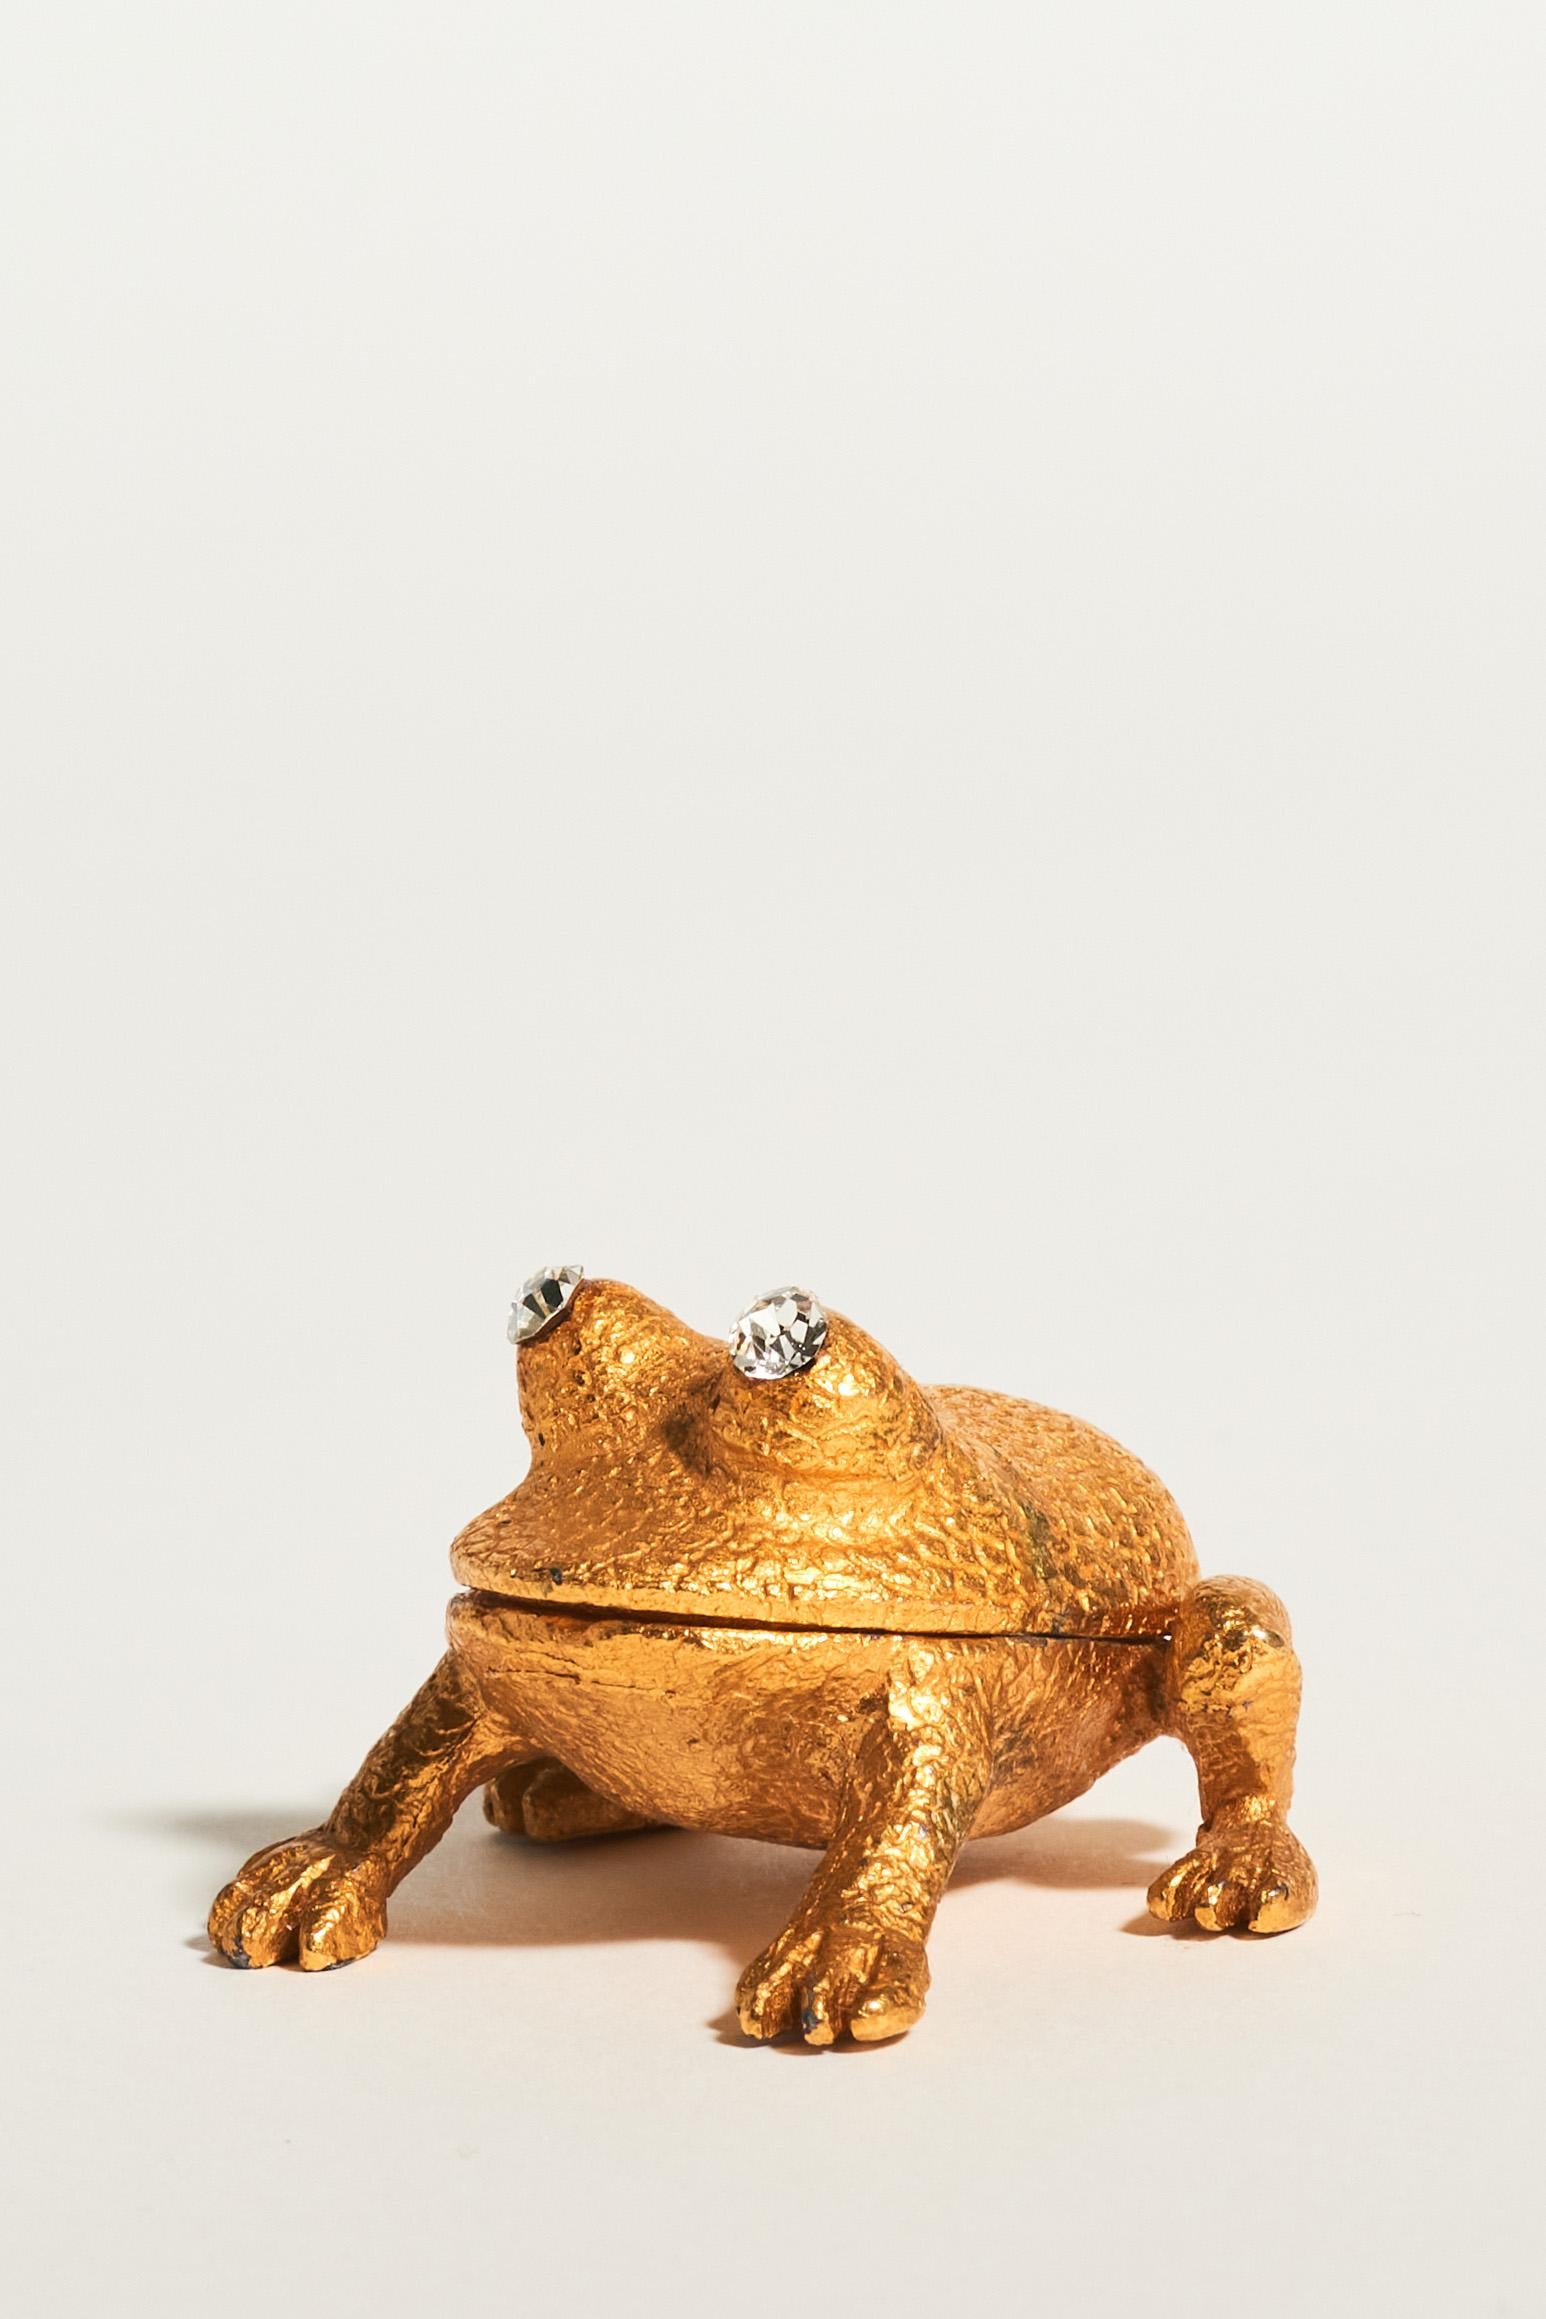 Gold tone frog trinket box made and marked by Florenza.